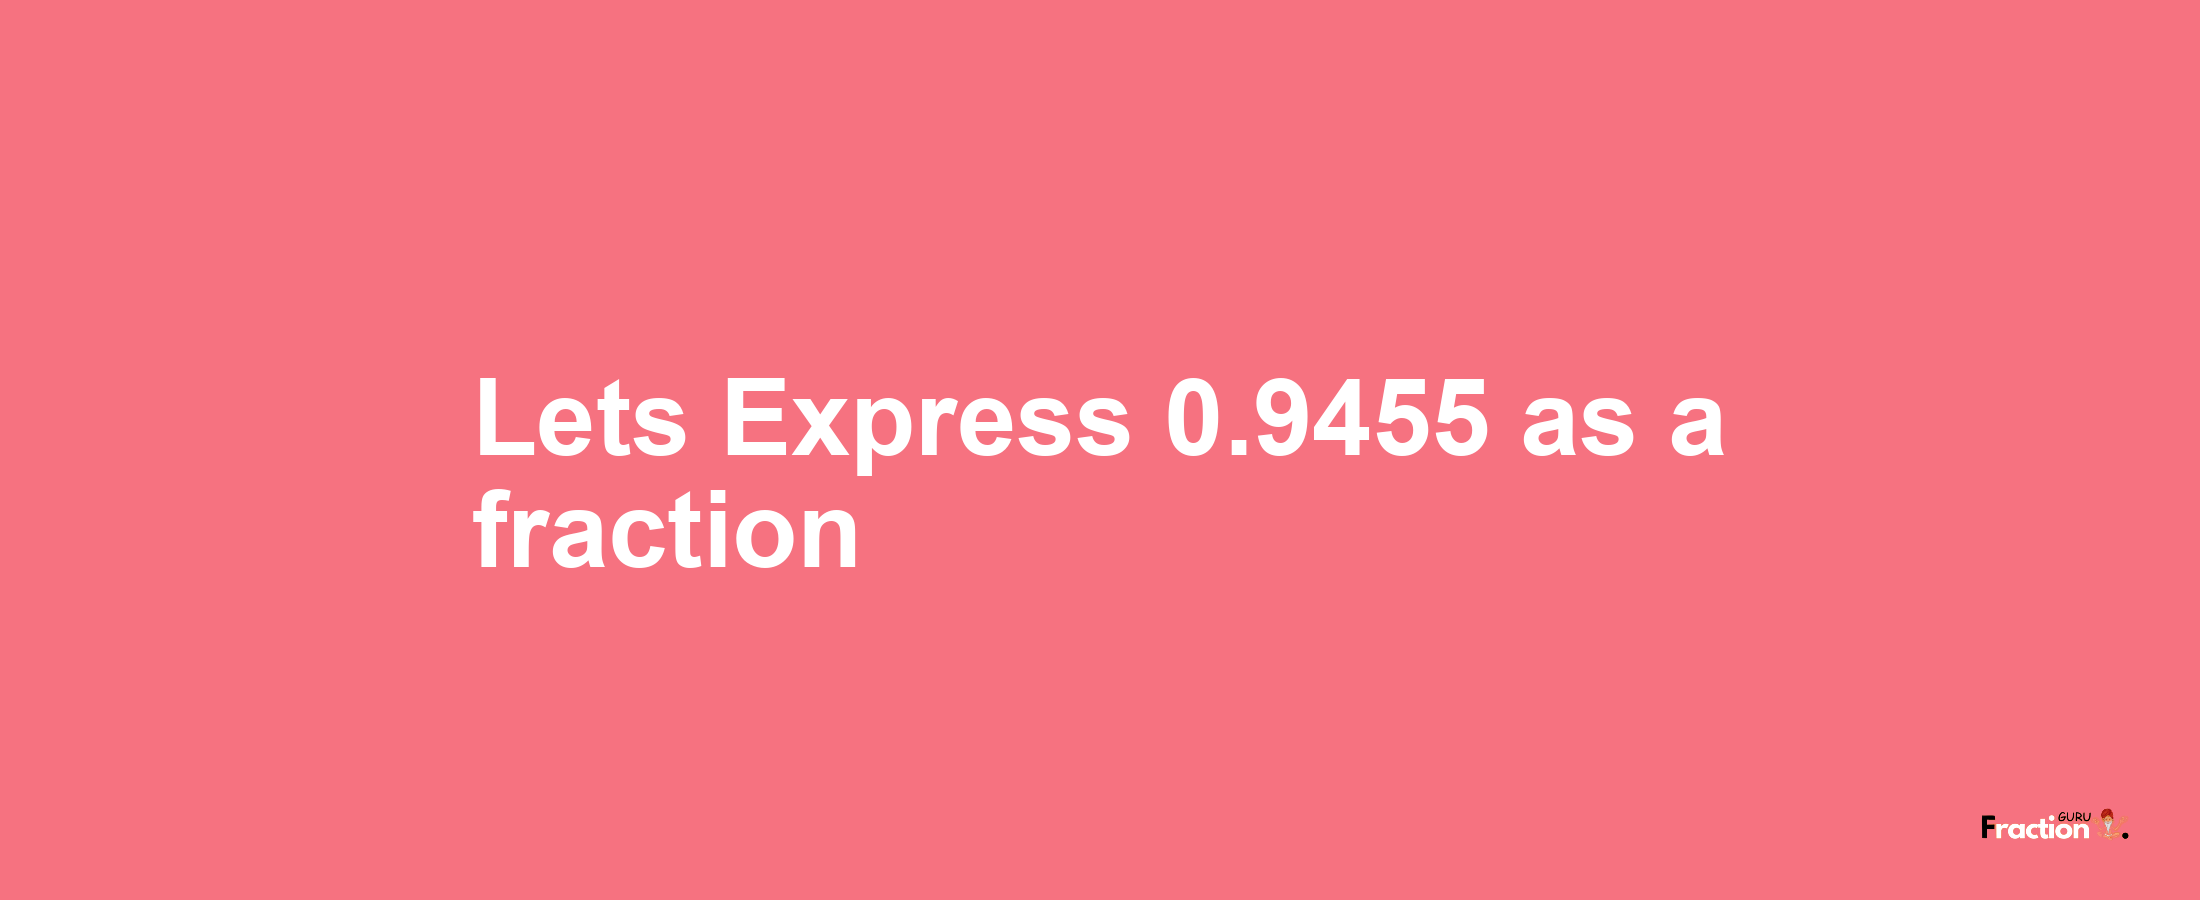 Lets Express 0.9455 as afraction